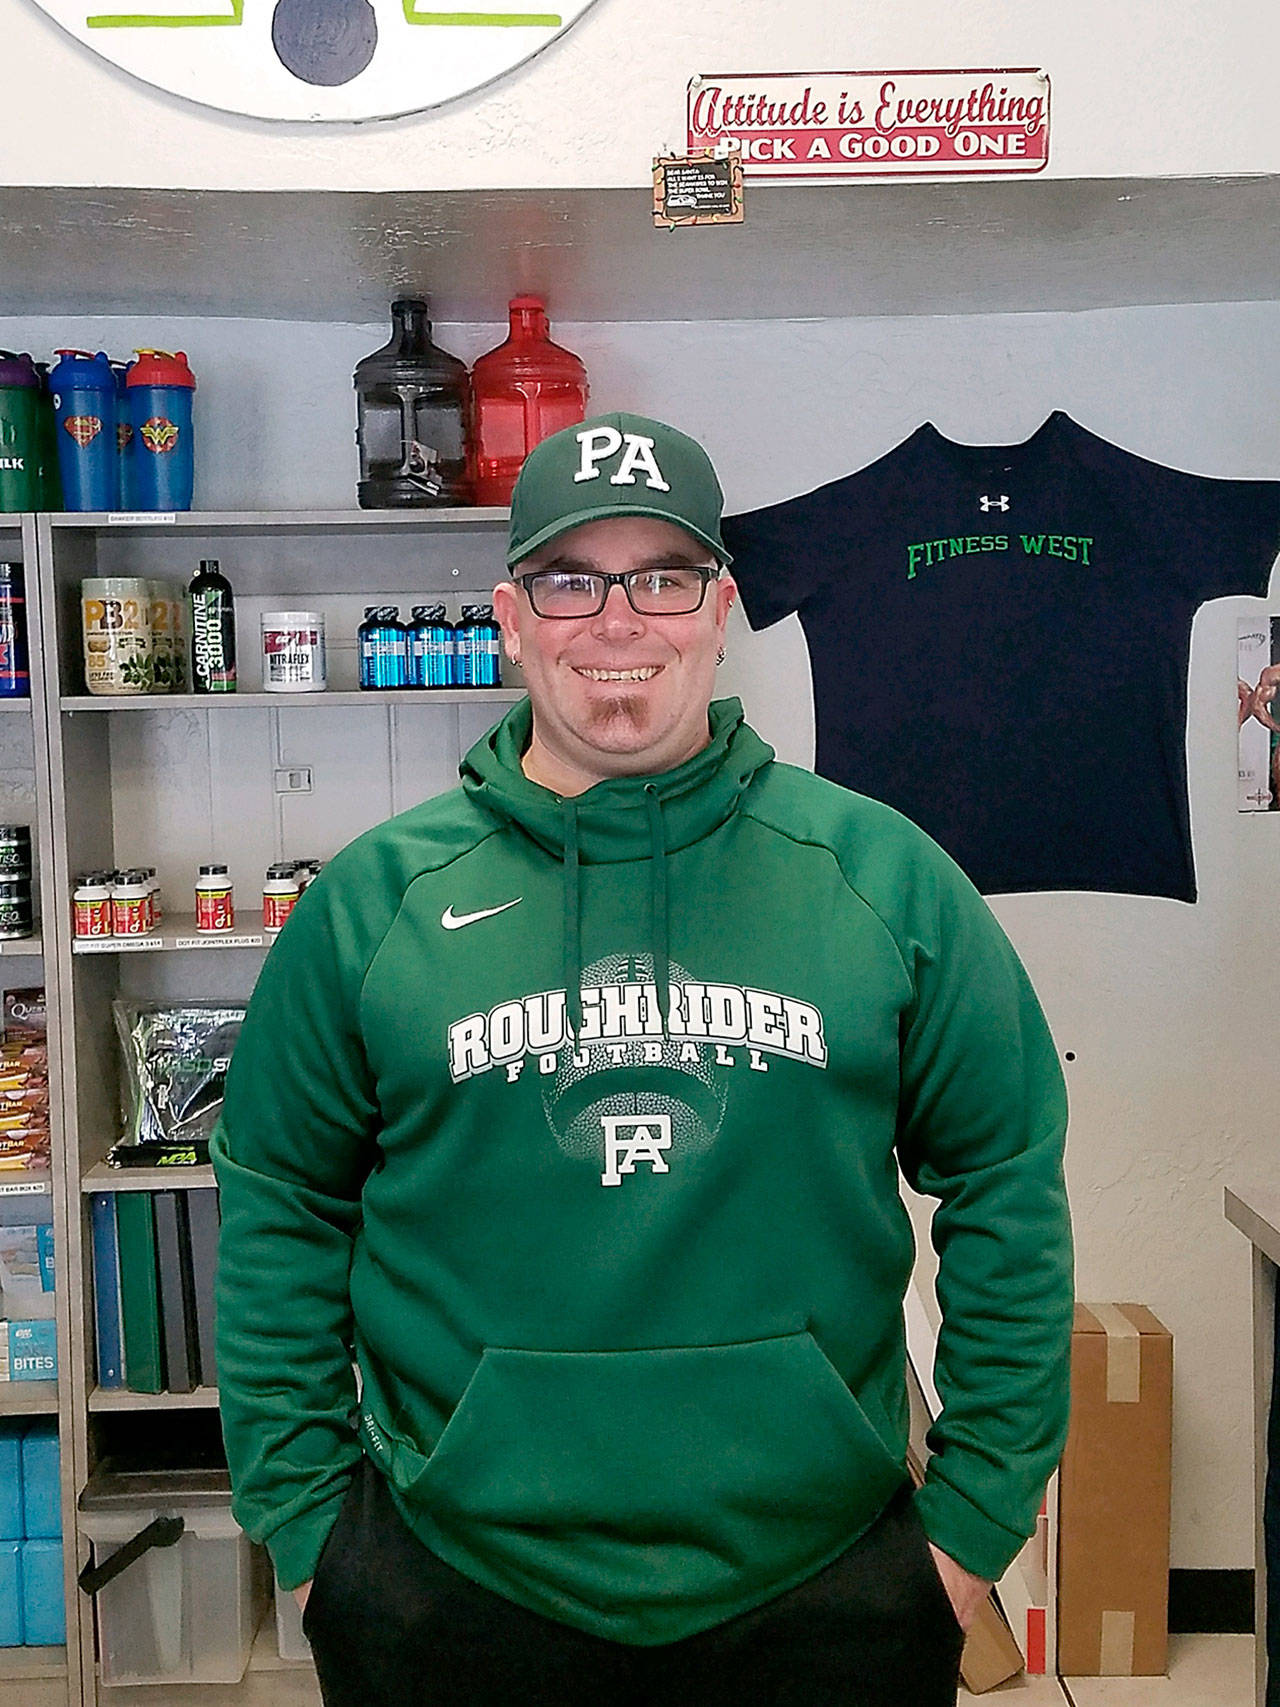 Troy Mann has been selected as the new Port Angeles High School head football coach. Mann served as an assistant coach for the Roughriders last season.